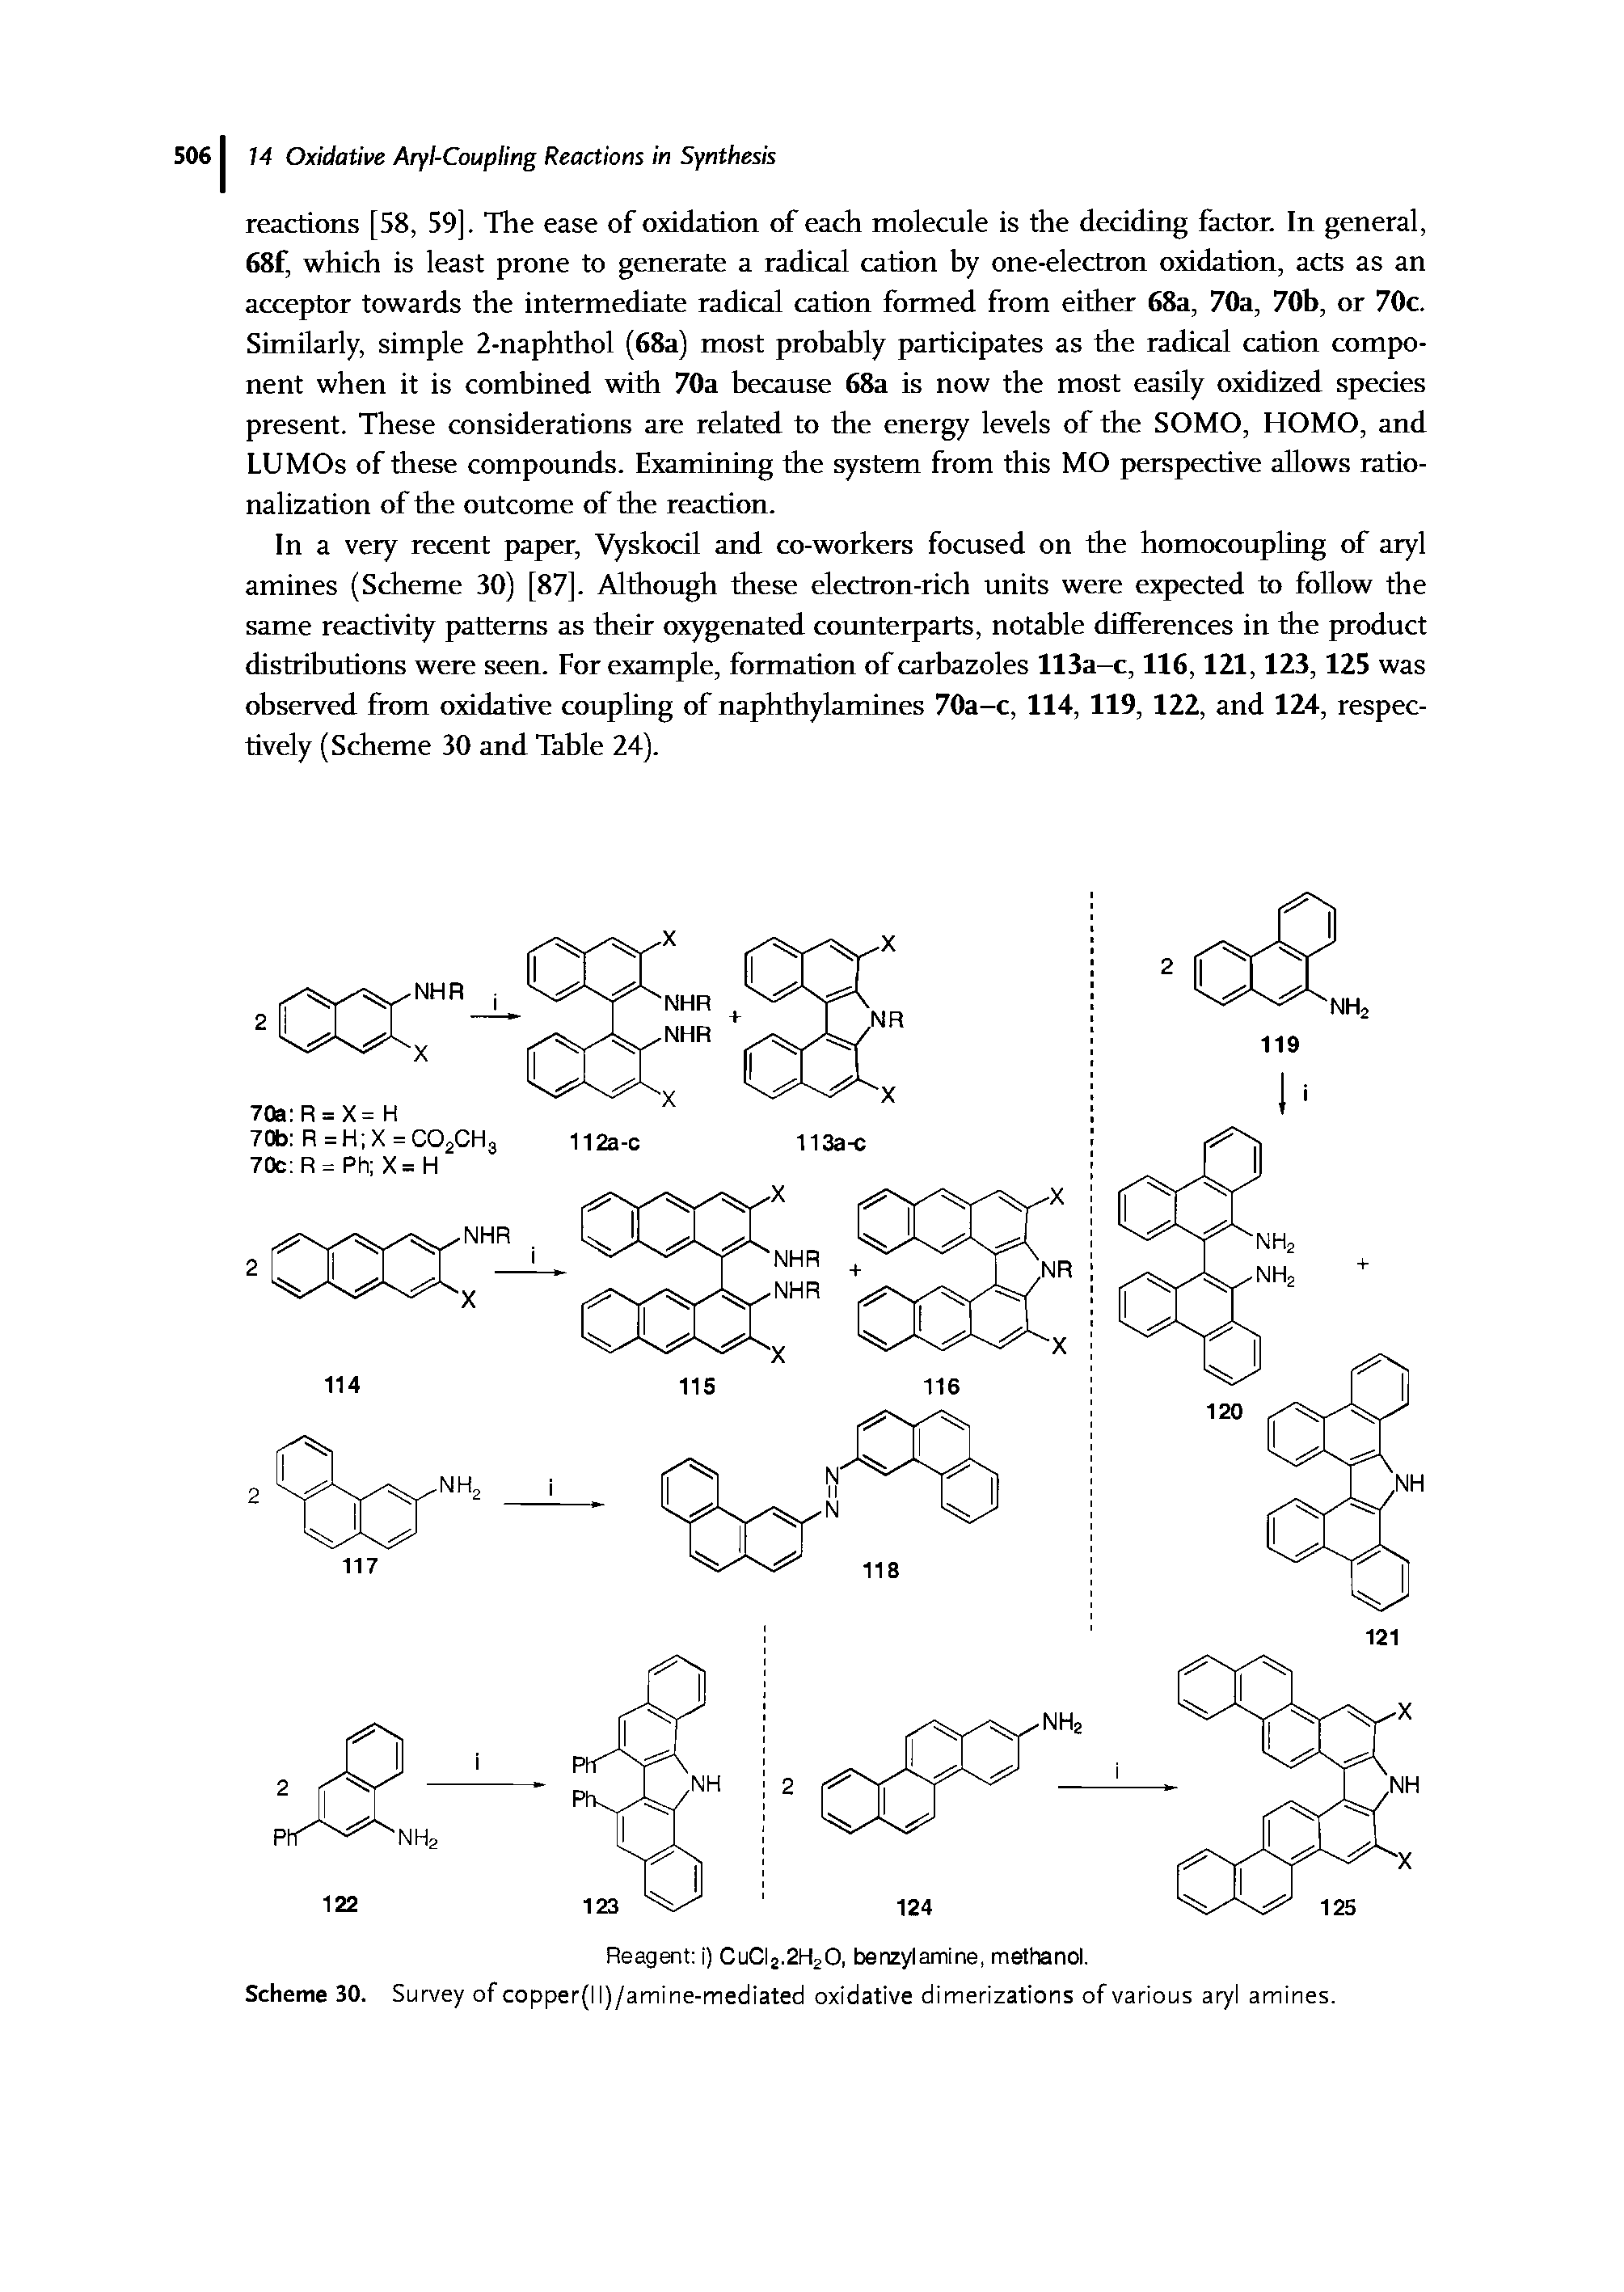 Scheme 30. Survey of copper(l l)/amine-mediated oxidative dimerizations of various aryl amines.